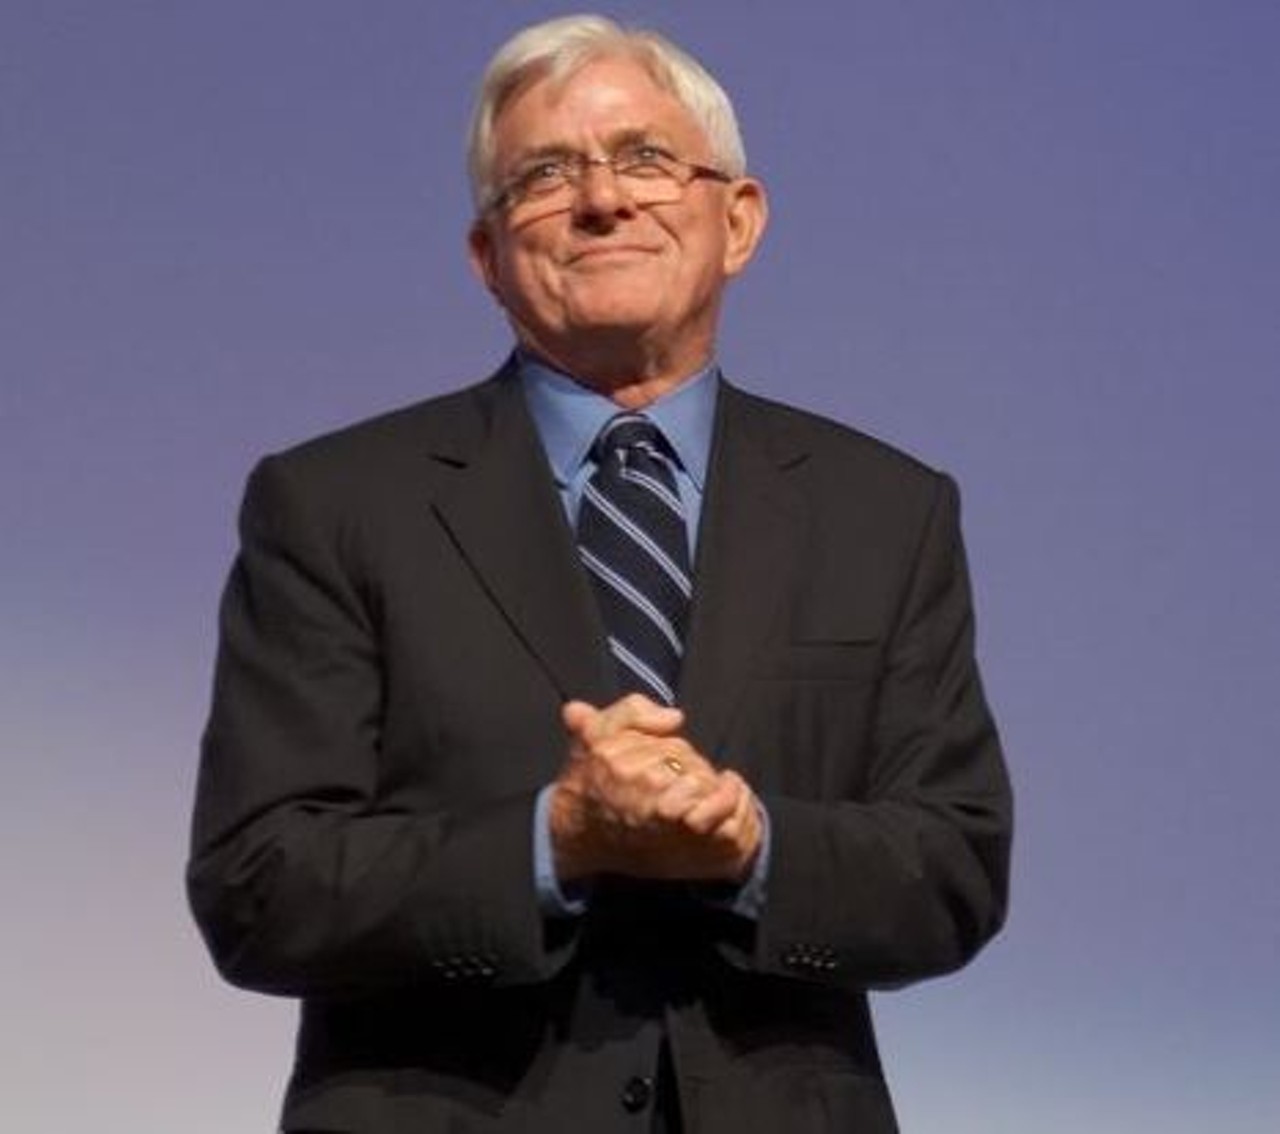  Phil Donahue
The white-haired talk show host grew up in the city of Cleveland, with his family living in West Park. He graduated from St. Edward High School as part of the first graduating class. In 1996, Donahue, who began his career as a production assistant at KYW radio and television in Cleveland in 1957, was ranked #42 on TV Guide's 50 Greatest TV Stars of All Time.
Photo via Wikimedia/JBach